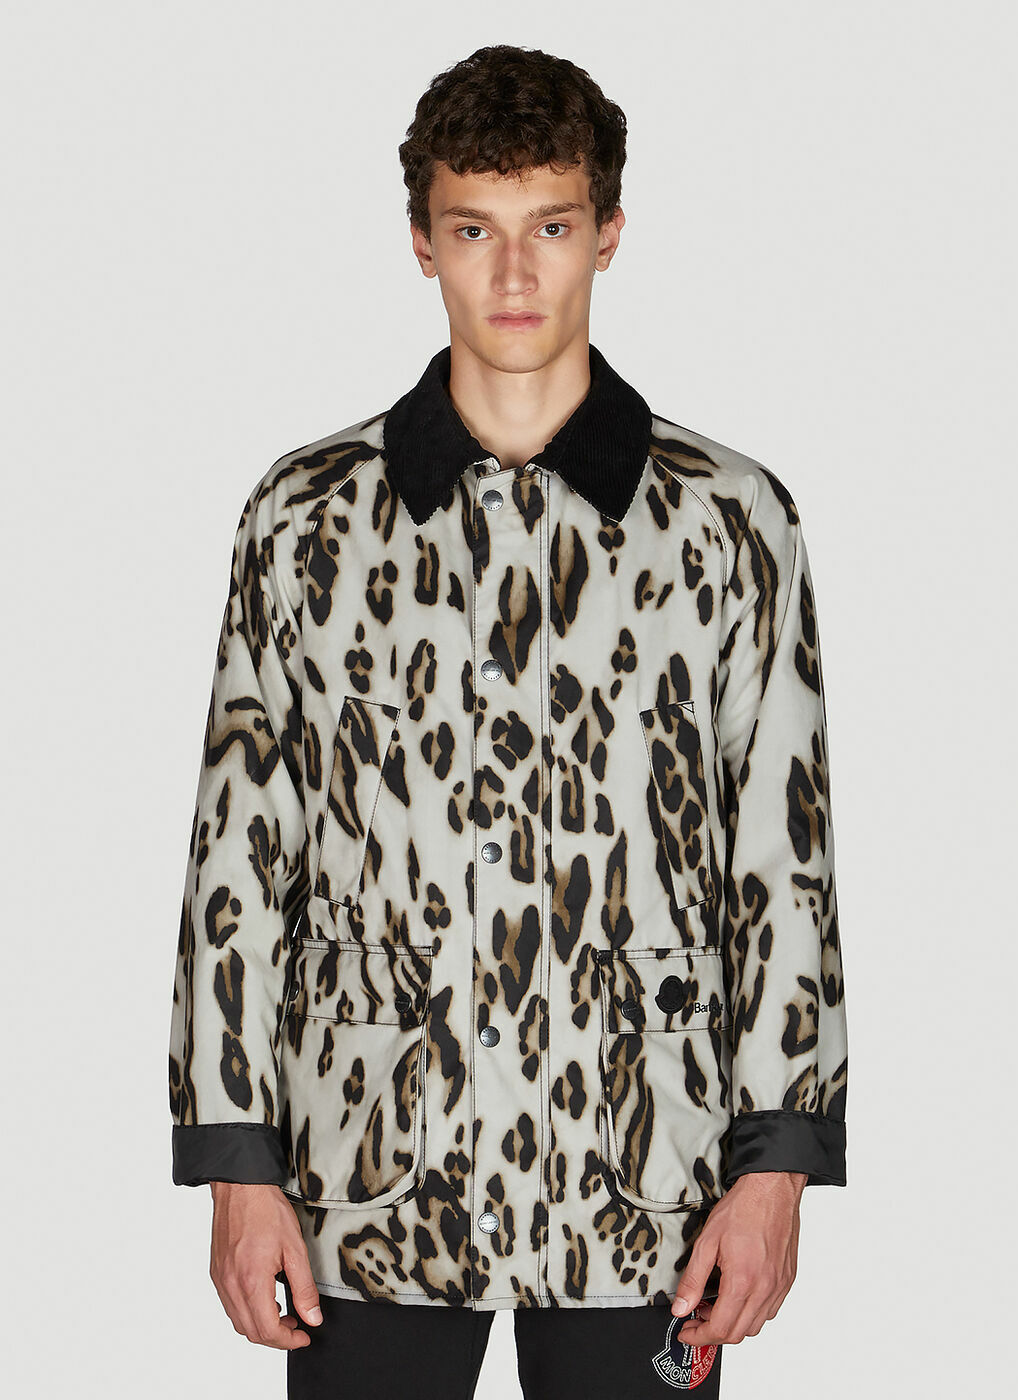 x Barbour Wight Leopard Print Waxed Jacket in White Moncler